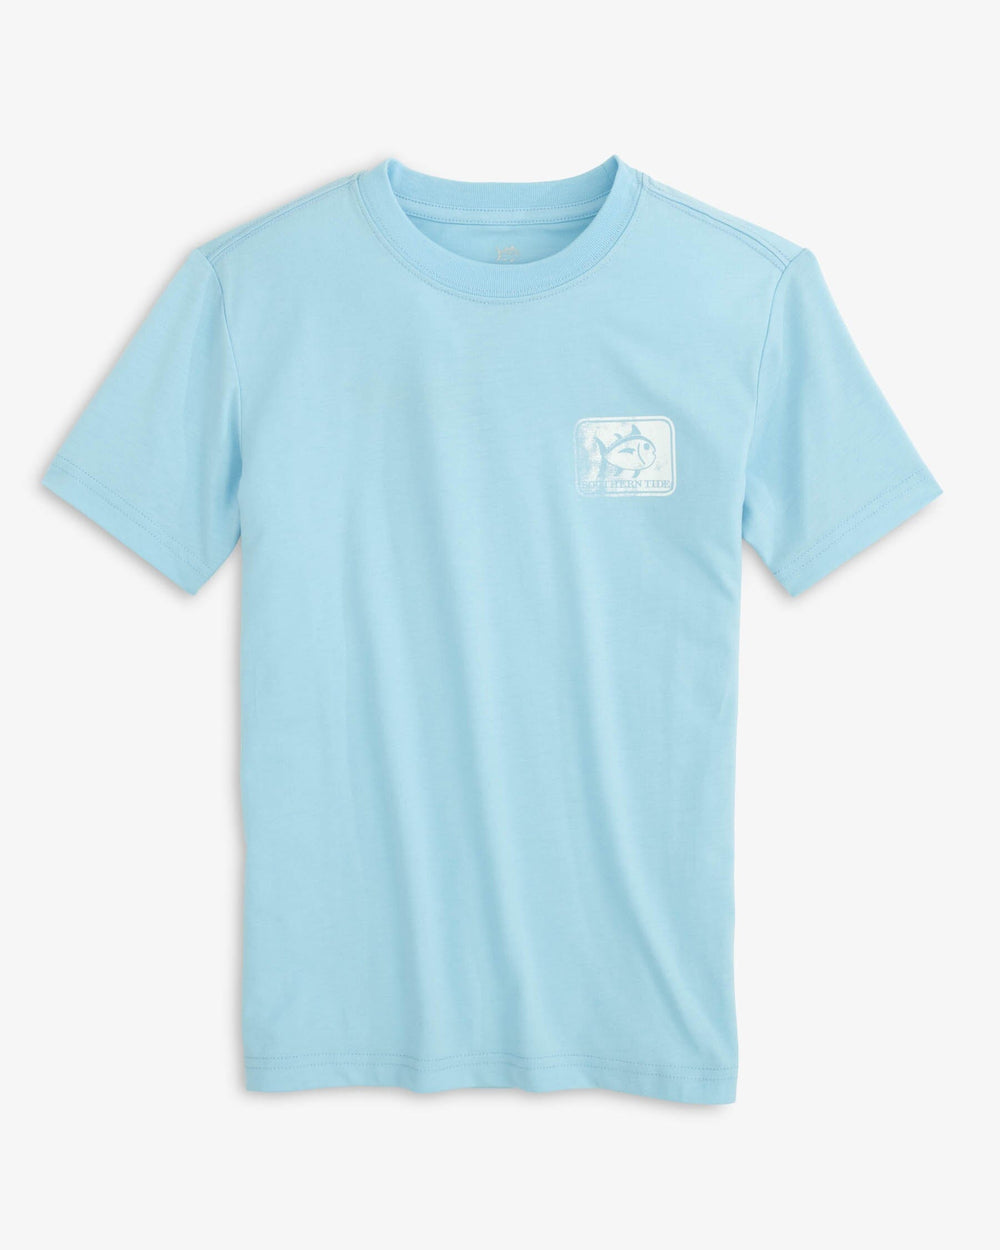 The front view of the Southern Tide Youth Skipjack Reef T-Shirt by Southern Tide - Rain Water